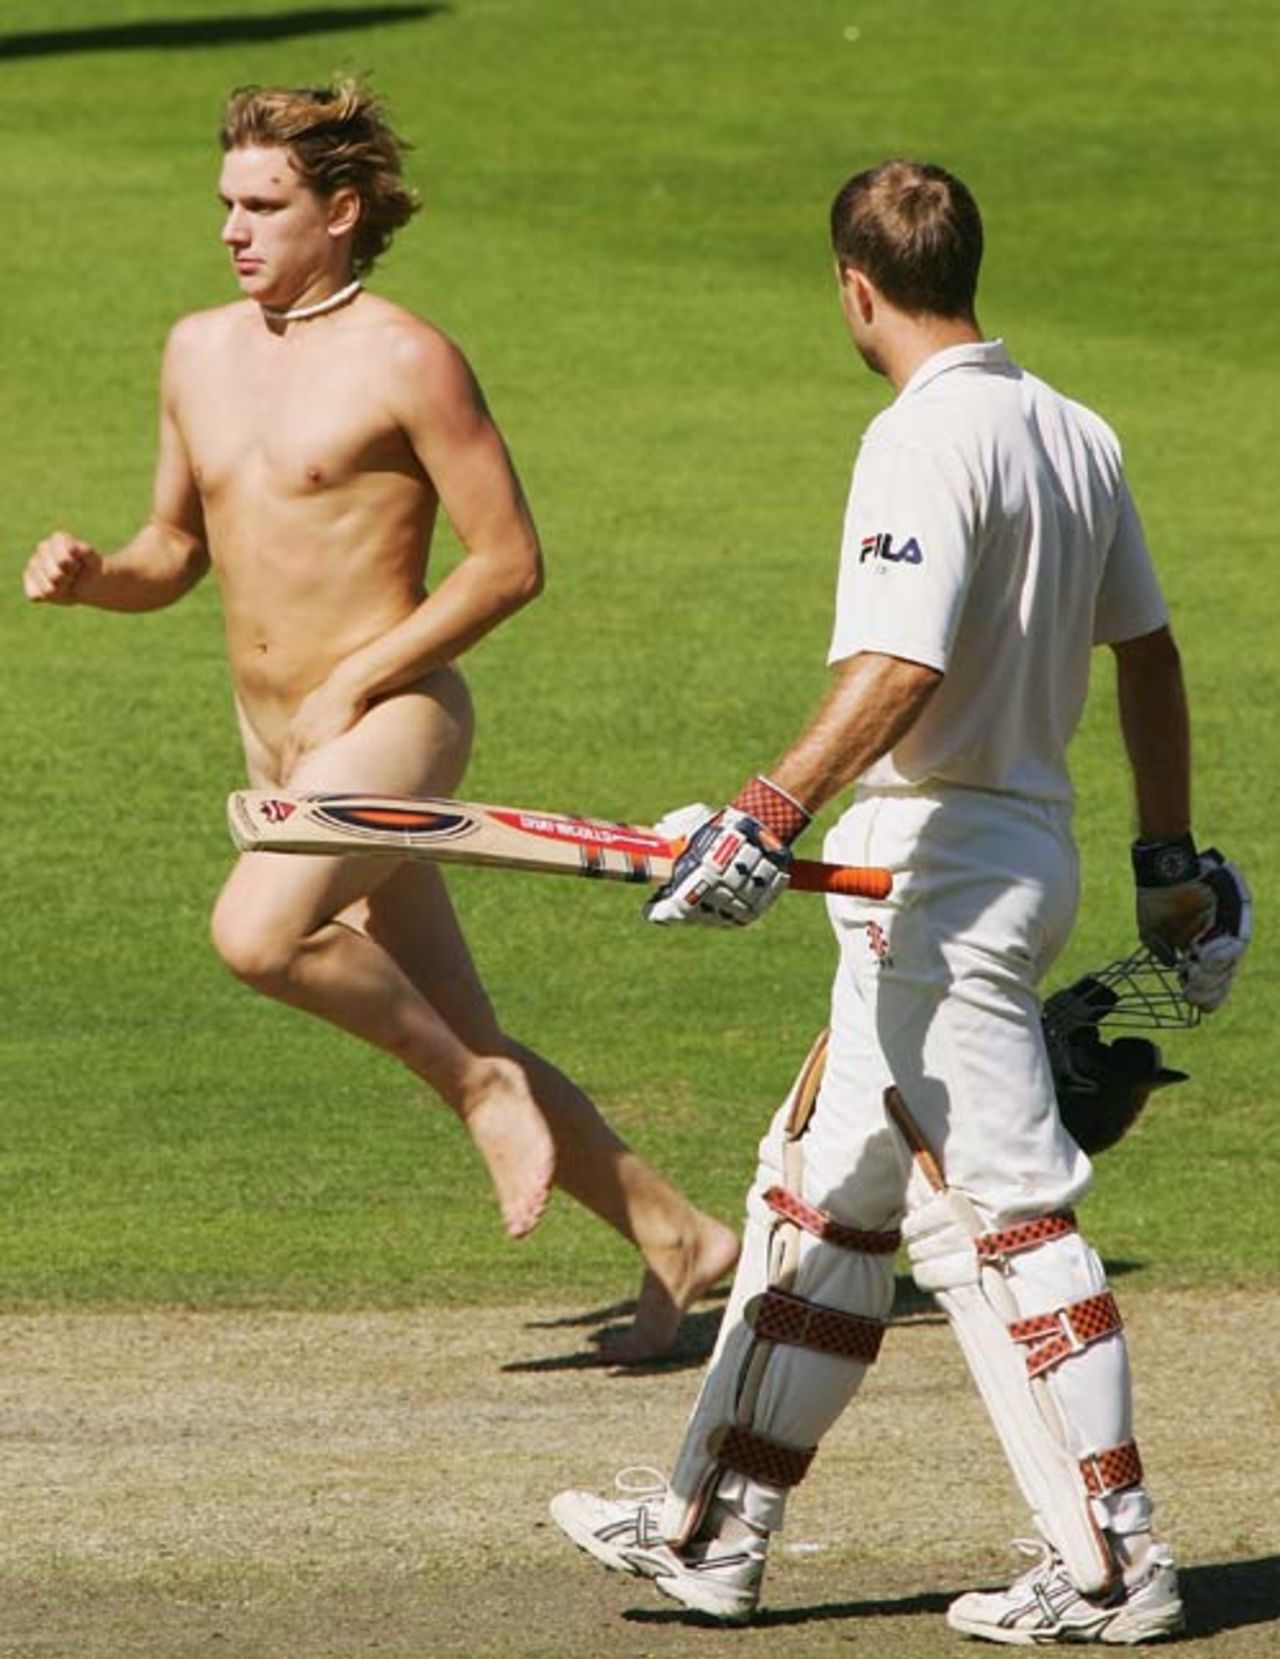 Simon Katich looks on as a streaker runs by, New Zealand v Australia, first Test, Christchurch, 12 March 2005